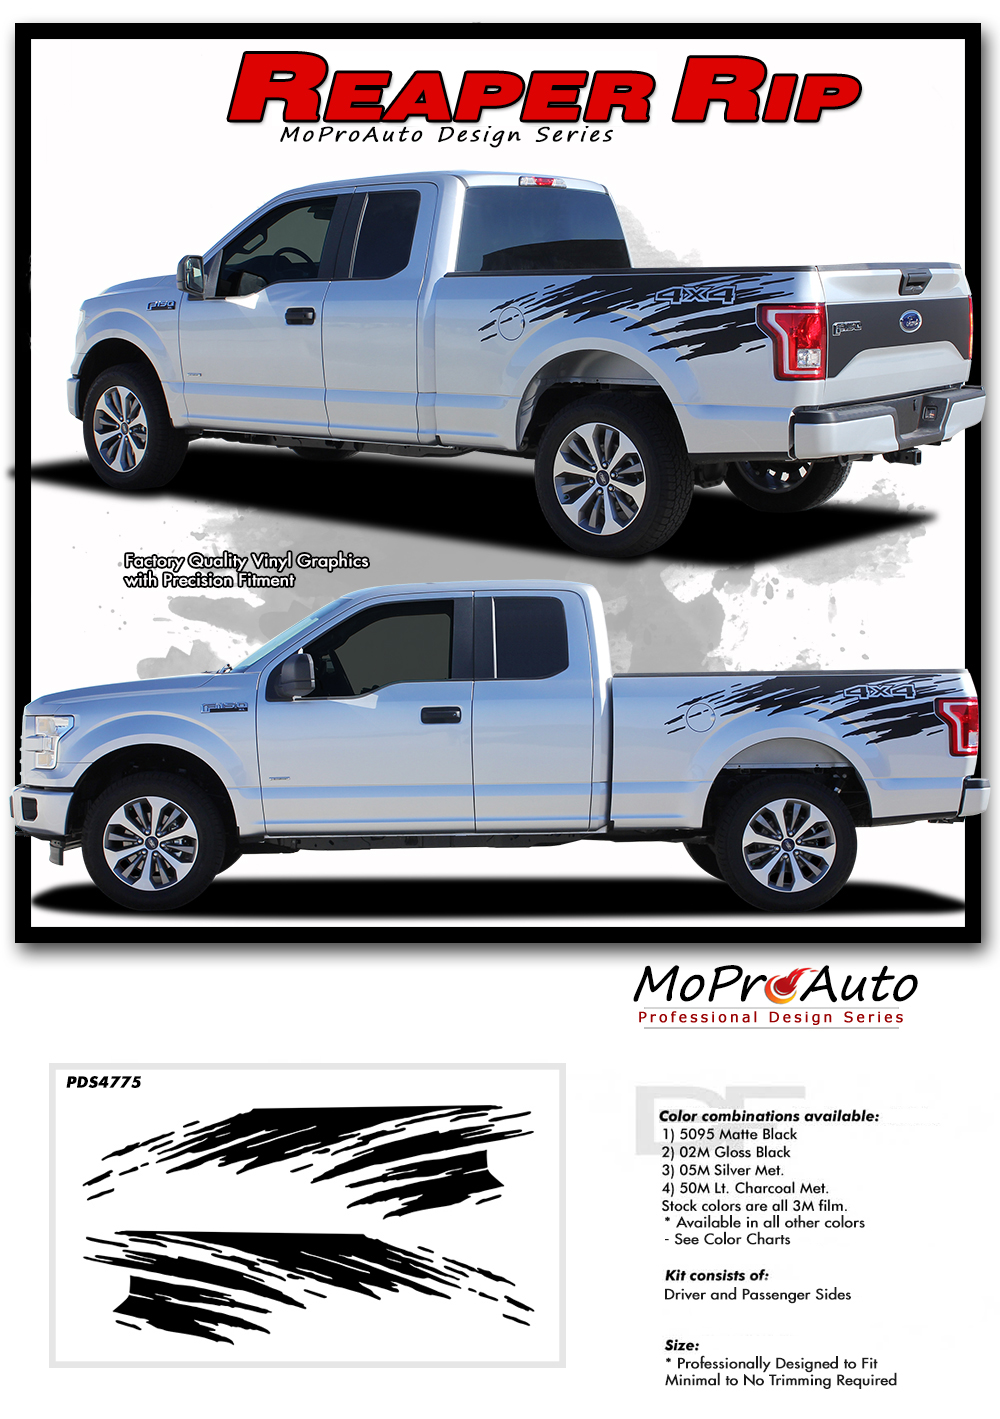 2015, 2016, 2017, 2018, 2019, 2020 REAPER RIP MUDSLINGER Truck Bed Stripes Ford F-Series F-150 Appearance Package Vinyl Graphics and Decals Kit by MoProAuto Pro Design Series